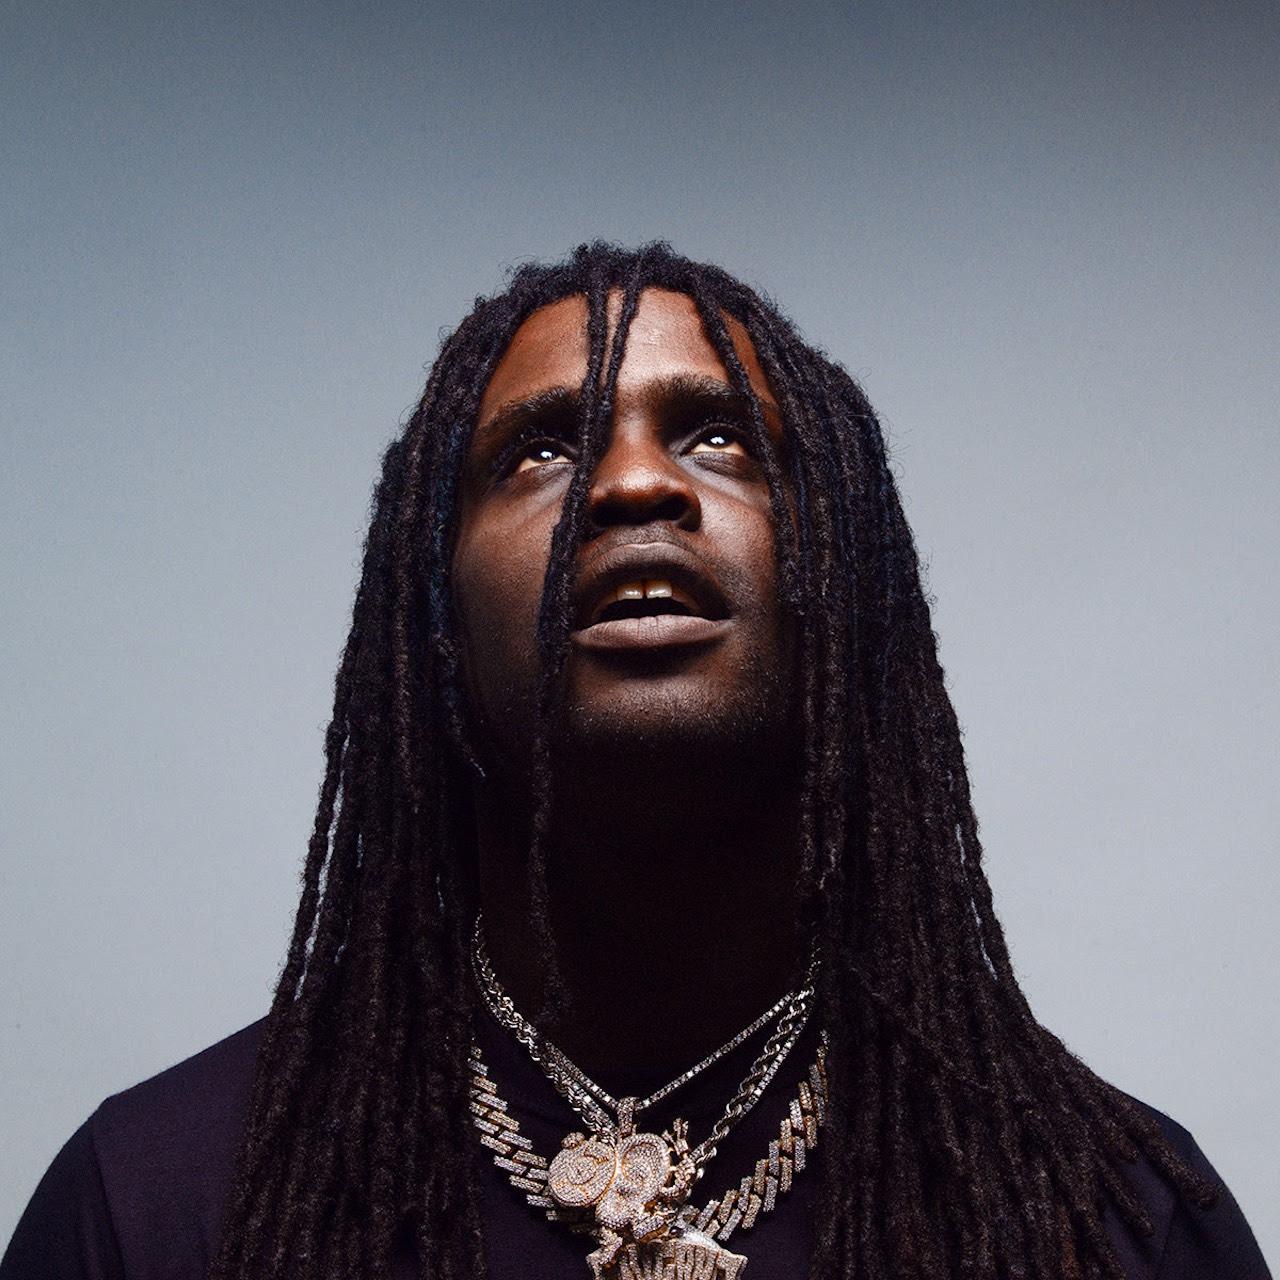 Chief Keef's “I Don't Like” And “Love Sosa” Are Now Certified Platinum